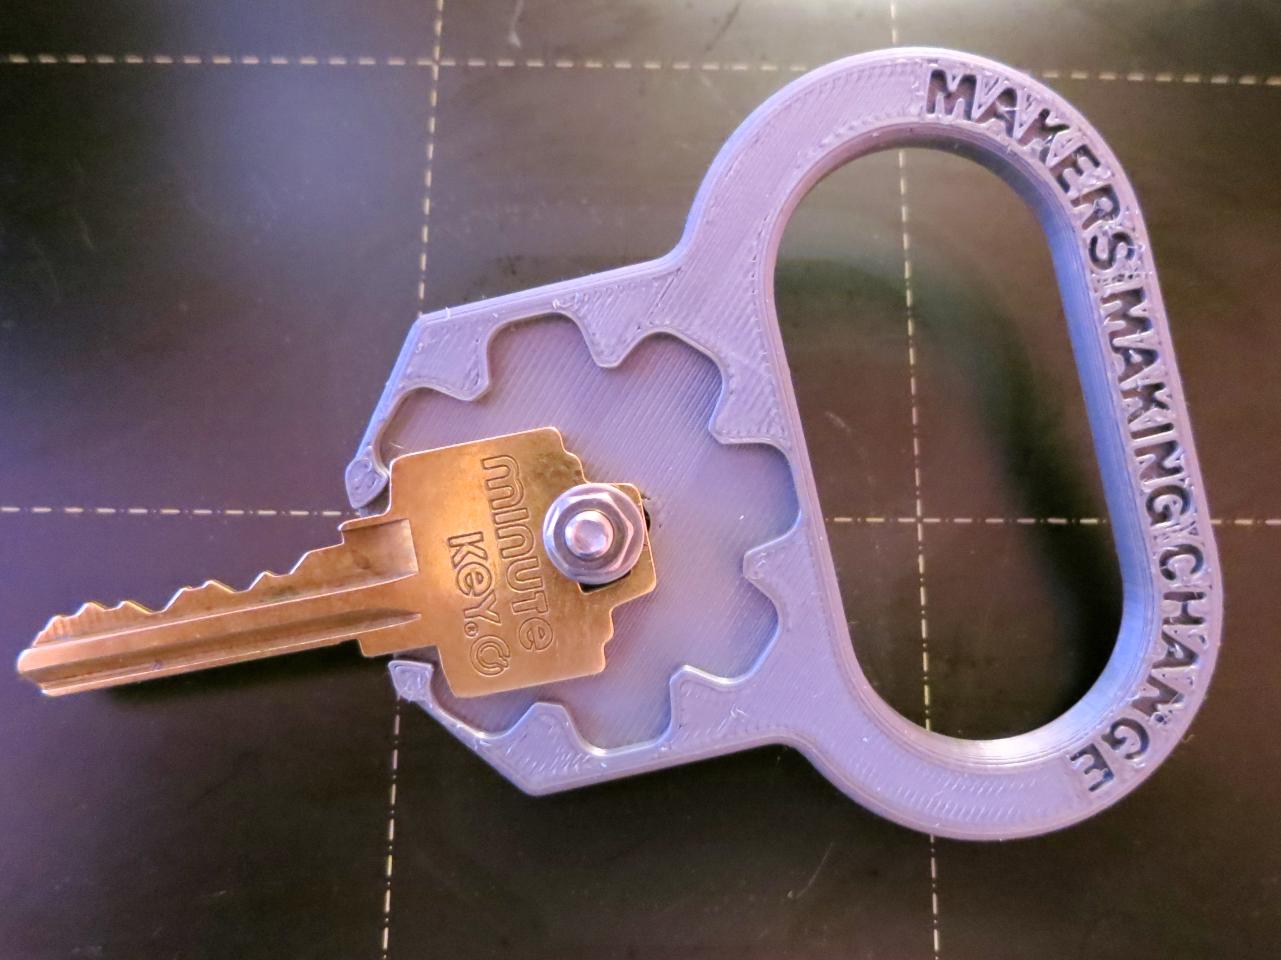 Assistive Key Turner from Makers Making Change